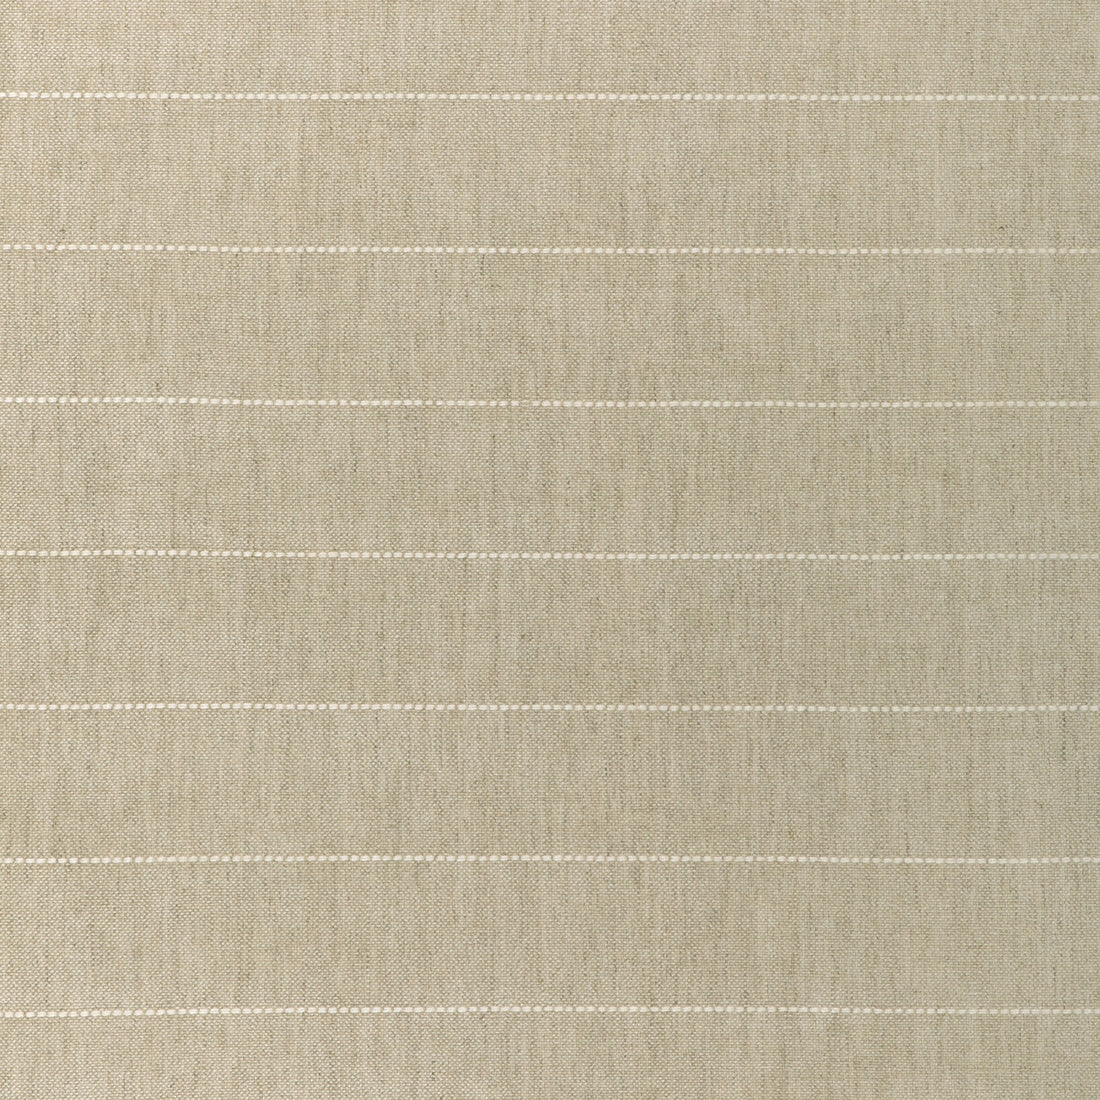 Barley Stripe fabric in flax color - pattern 36901.16.0 - by Kravet Couture in the Atelier Weaves collection